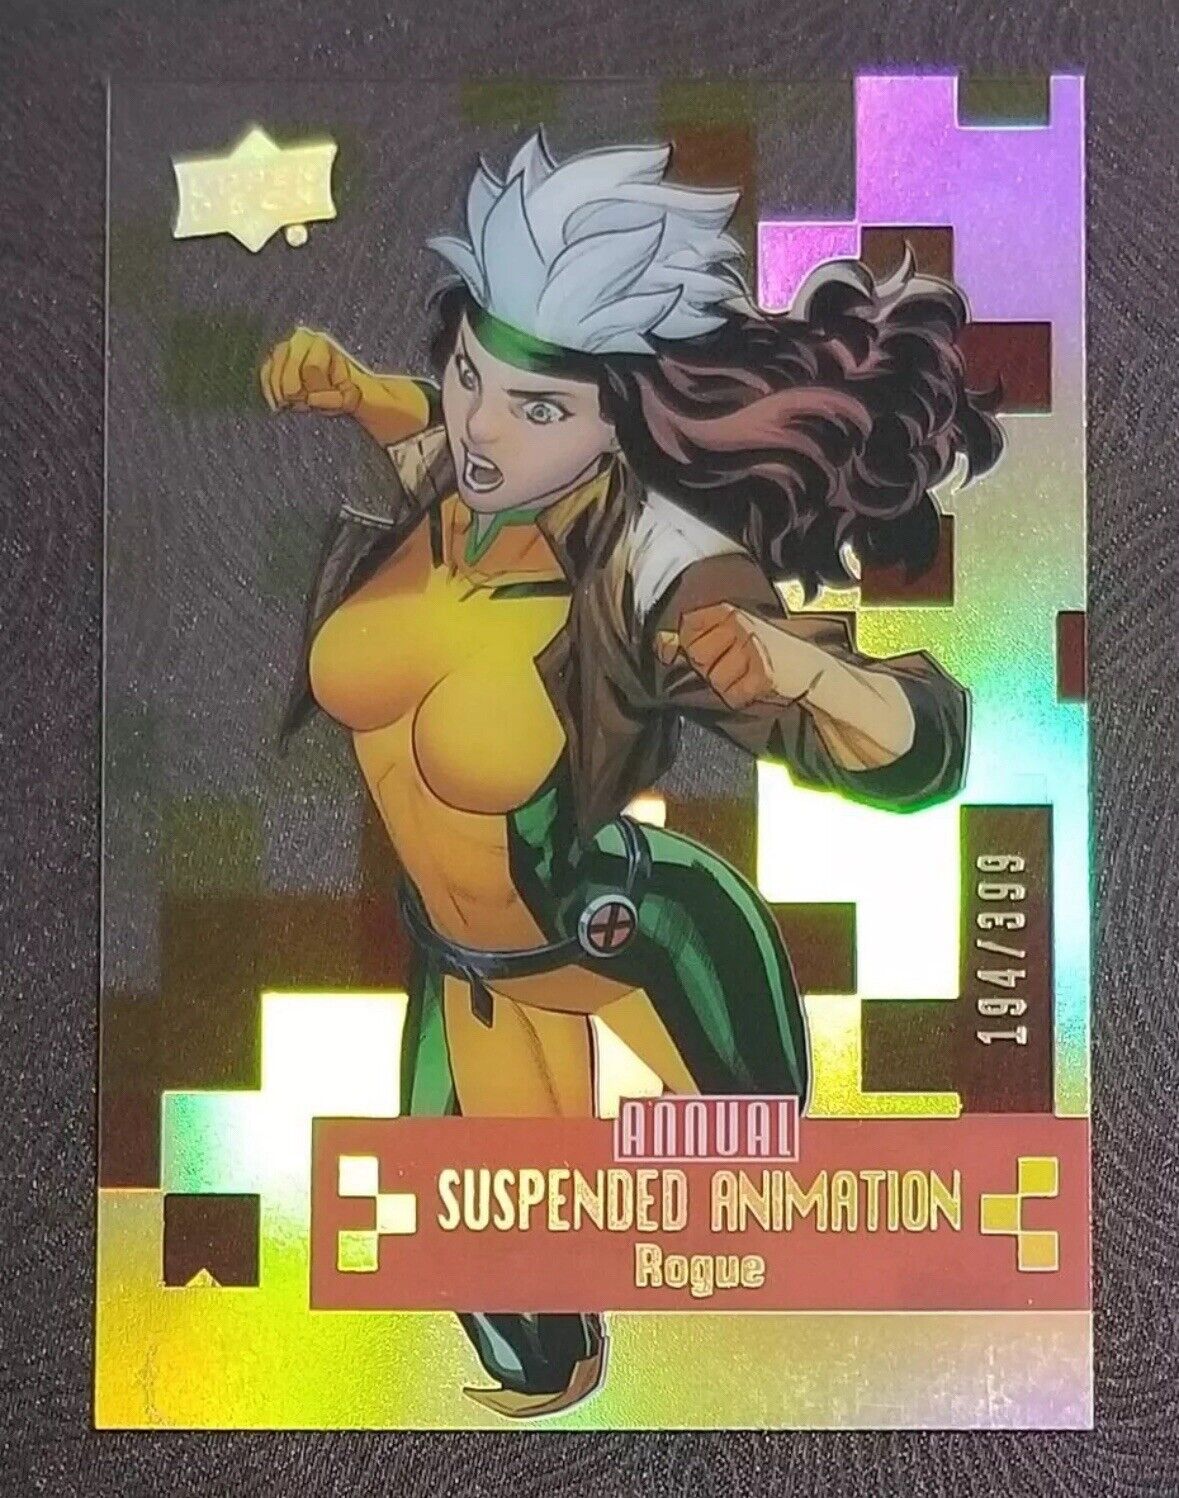 2022-2023 Marvel UD Suspended Animation Rogue #194/399 - Card 2